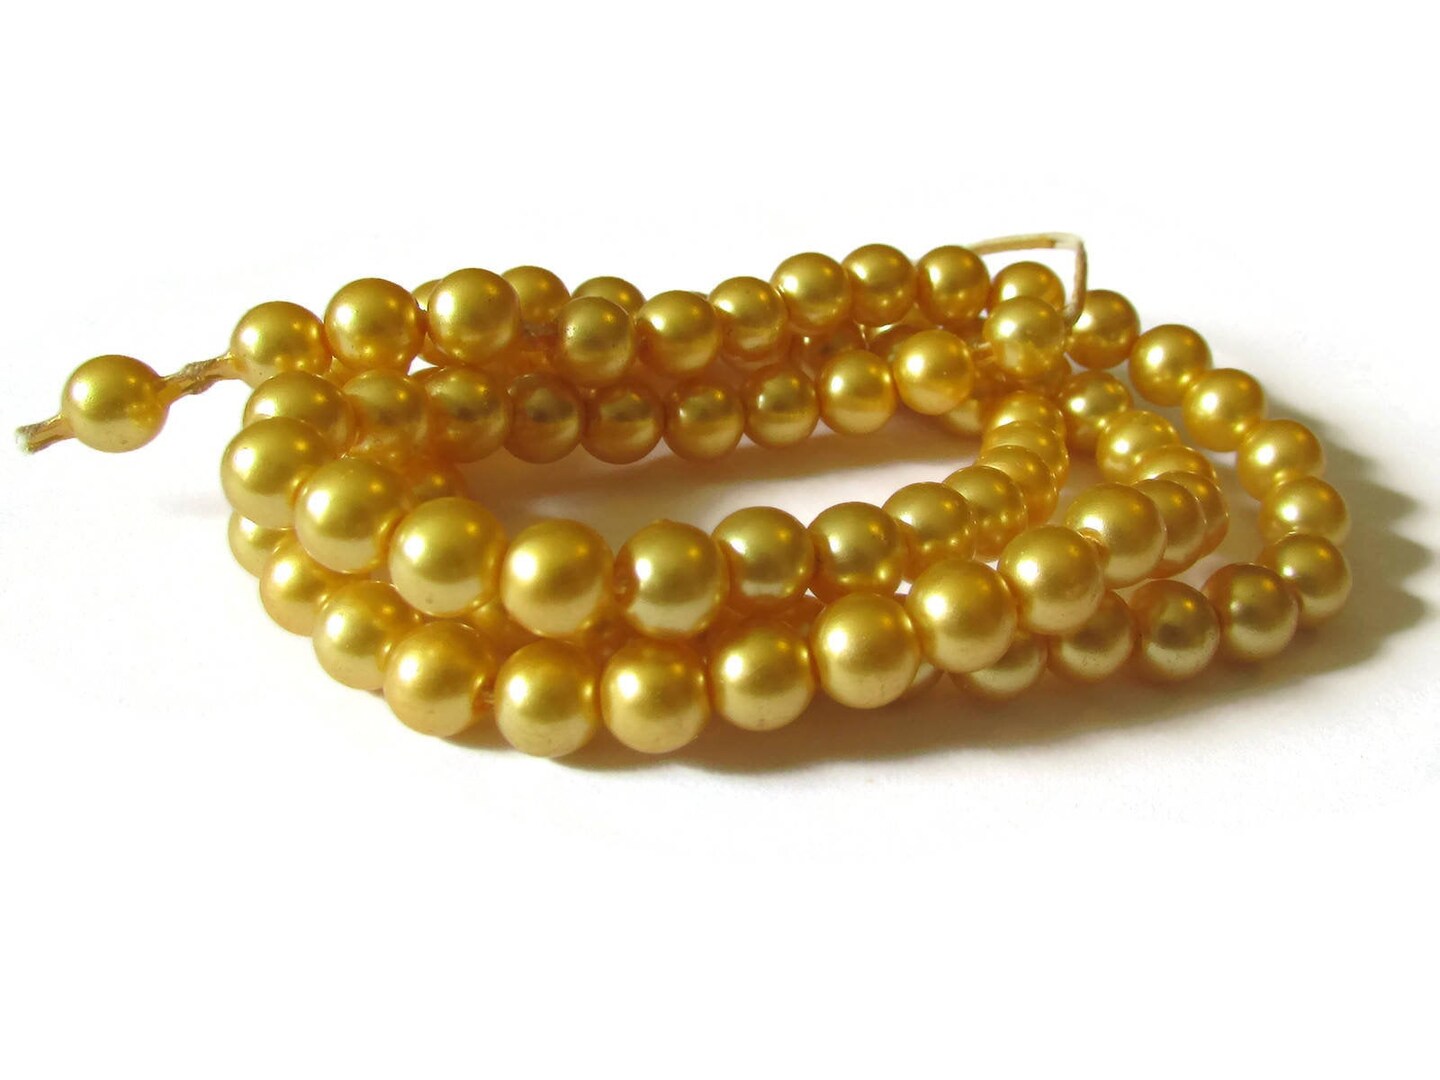 80 6mm Yellow Vintage Plastic Round Pearl Beads